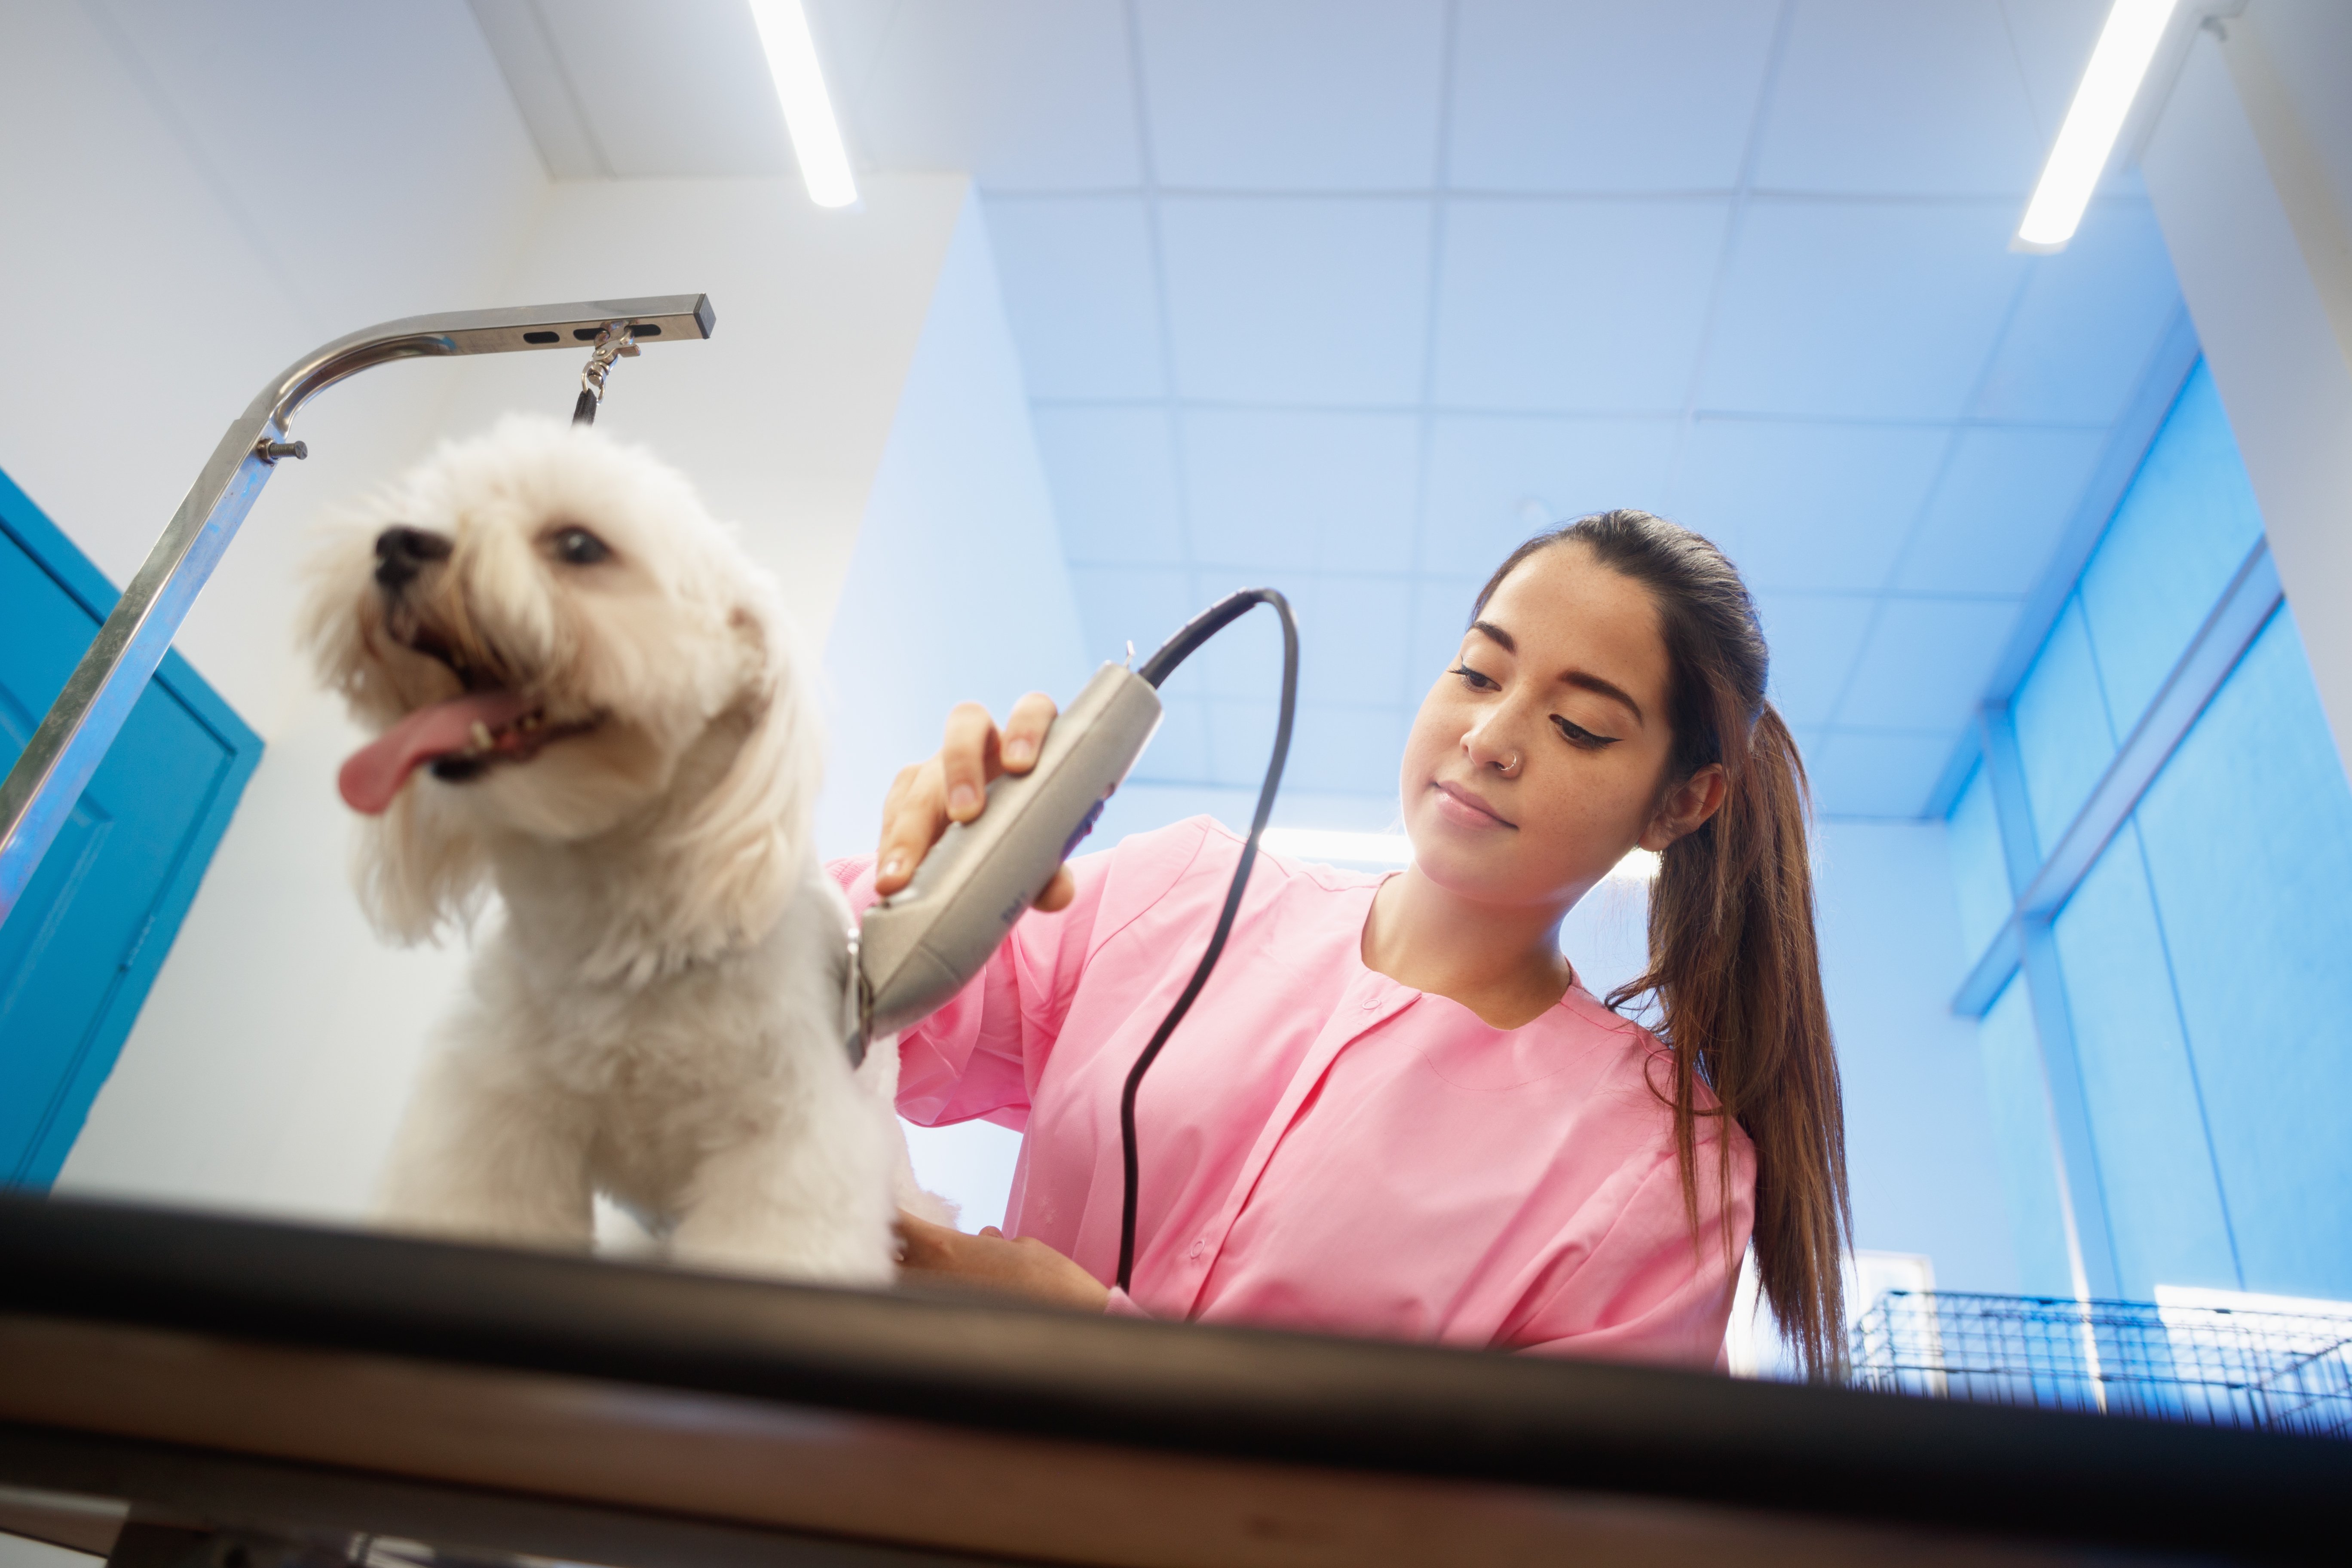 This image of a woman grooming a dog represents the types of services that Gingr’s dog grooming software will help streamline. 